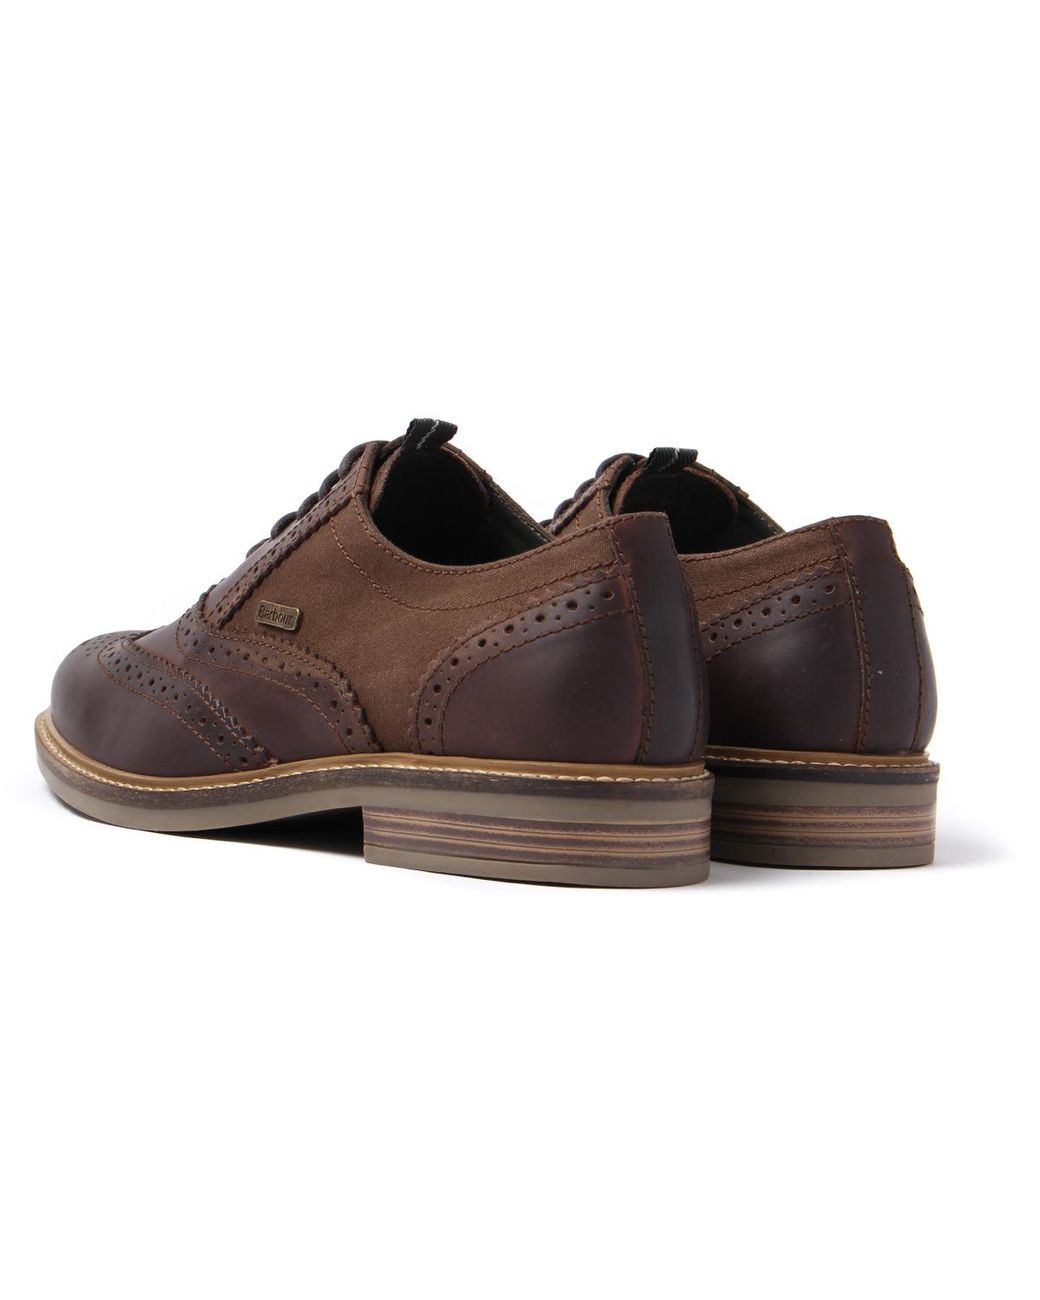 Barbour Barbour Redcar Choco Leather Oxford Brogues in Brown for Men | Lyst  UK